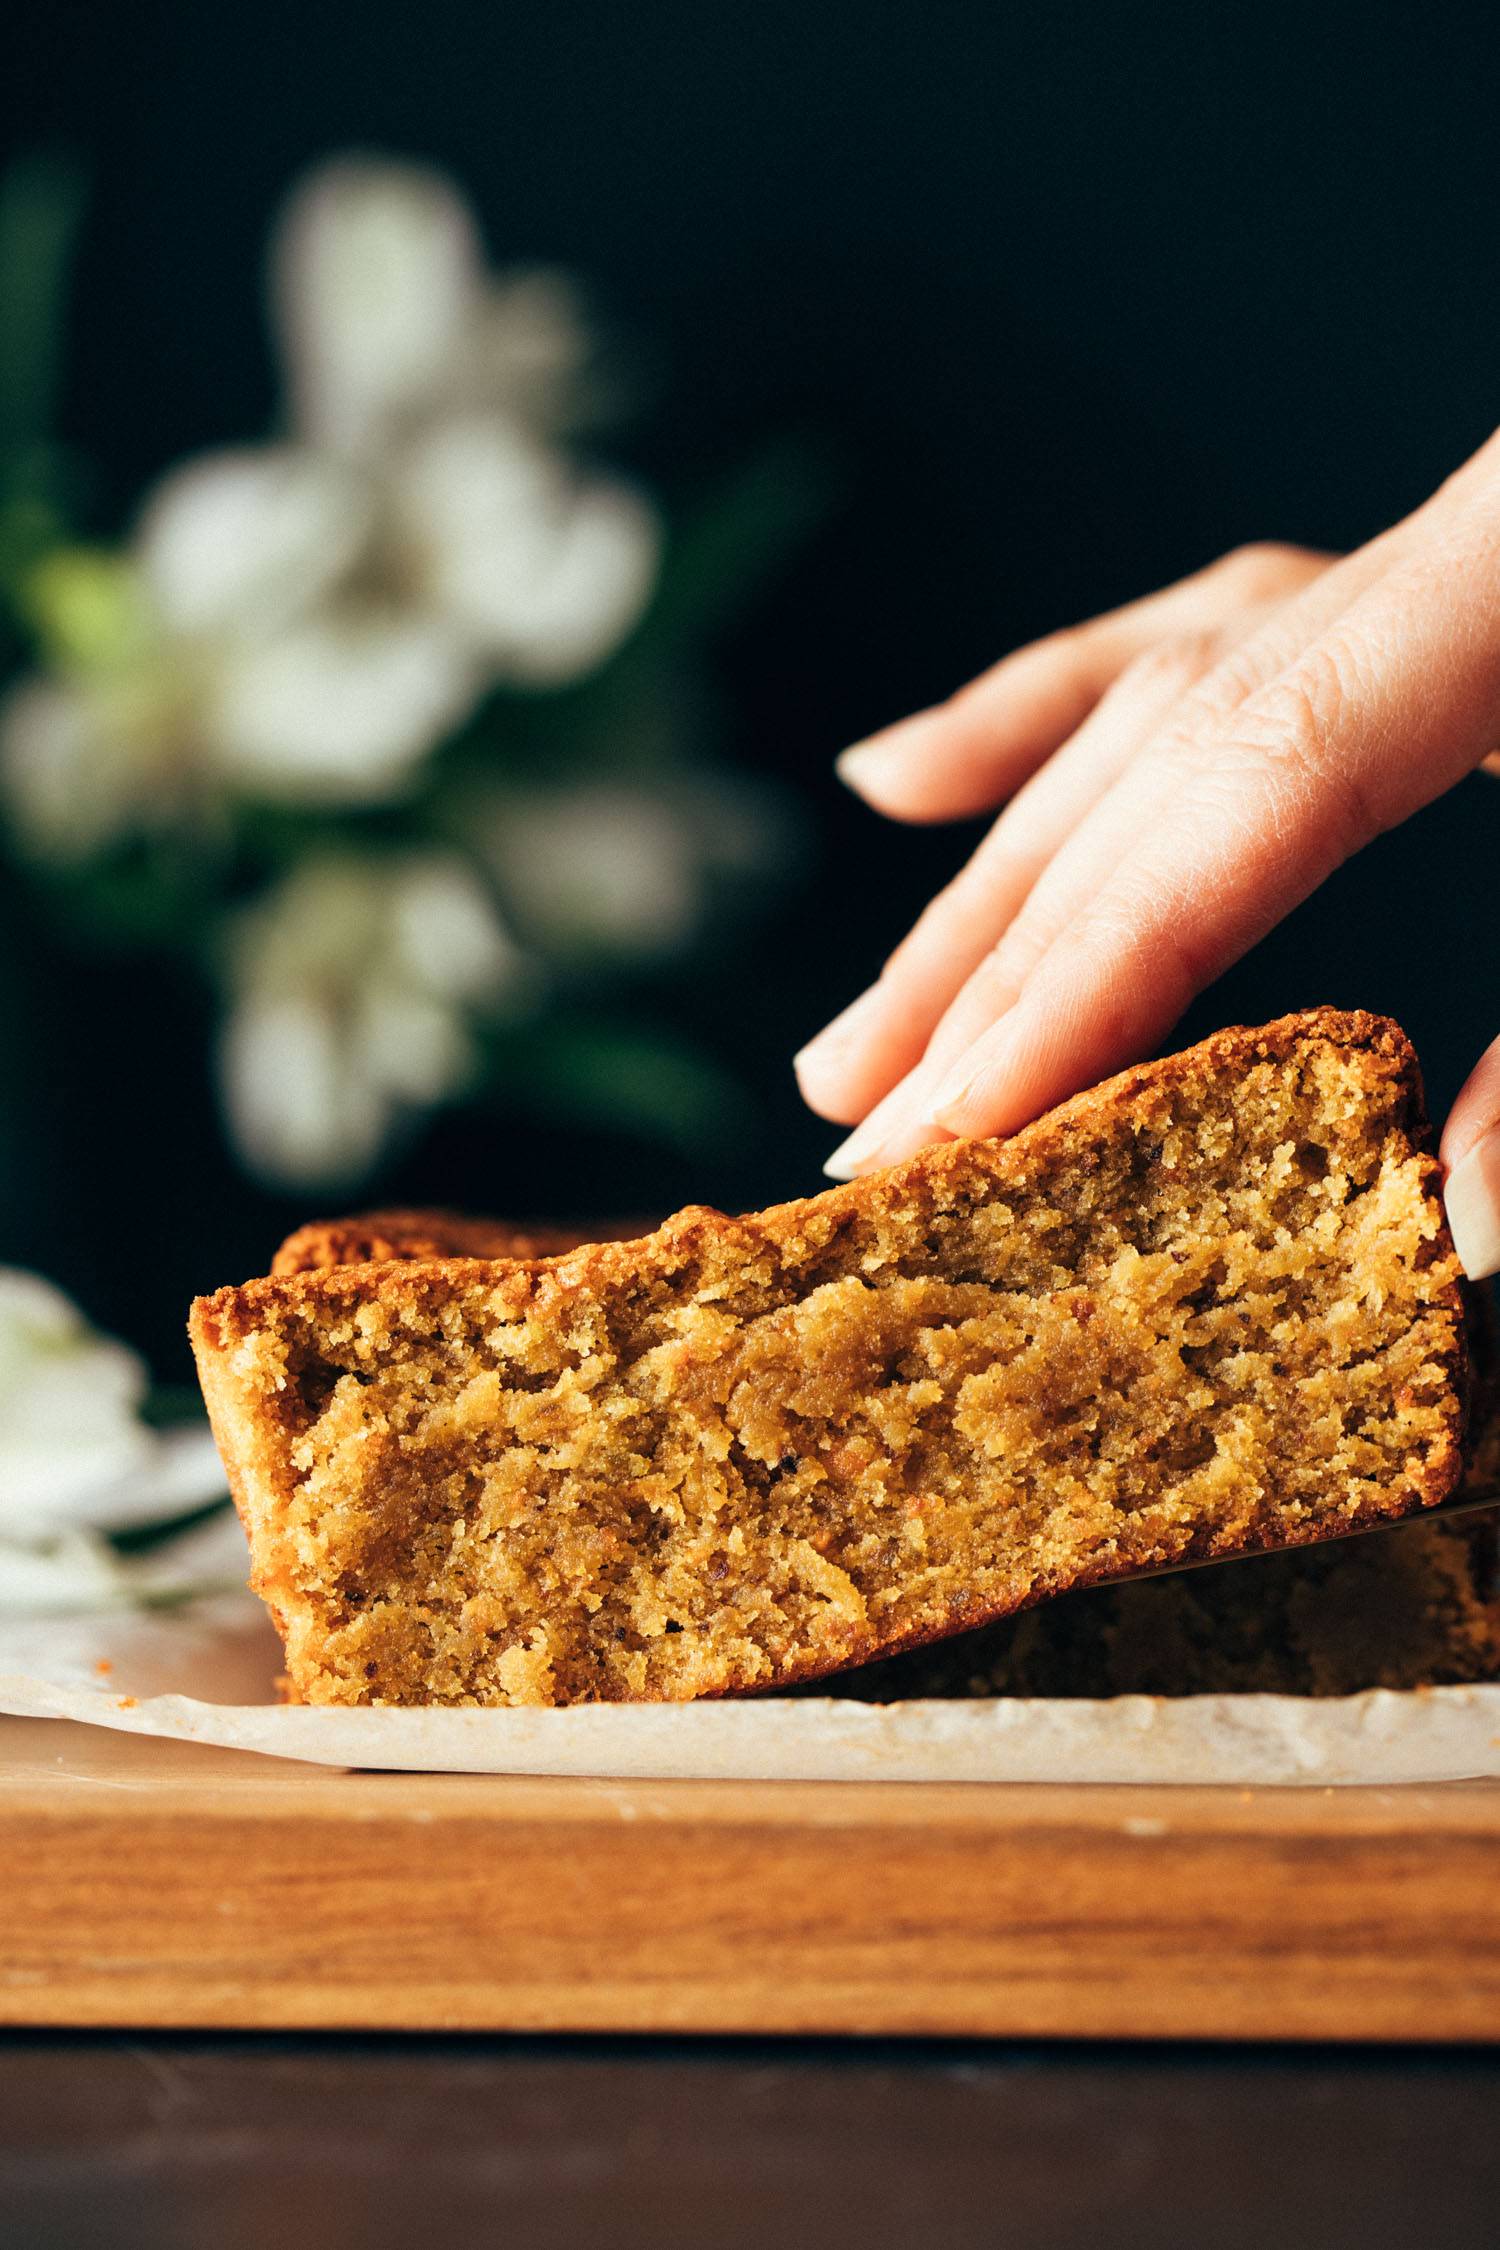 Hand grabbing a slice of pistachio loaf.